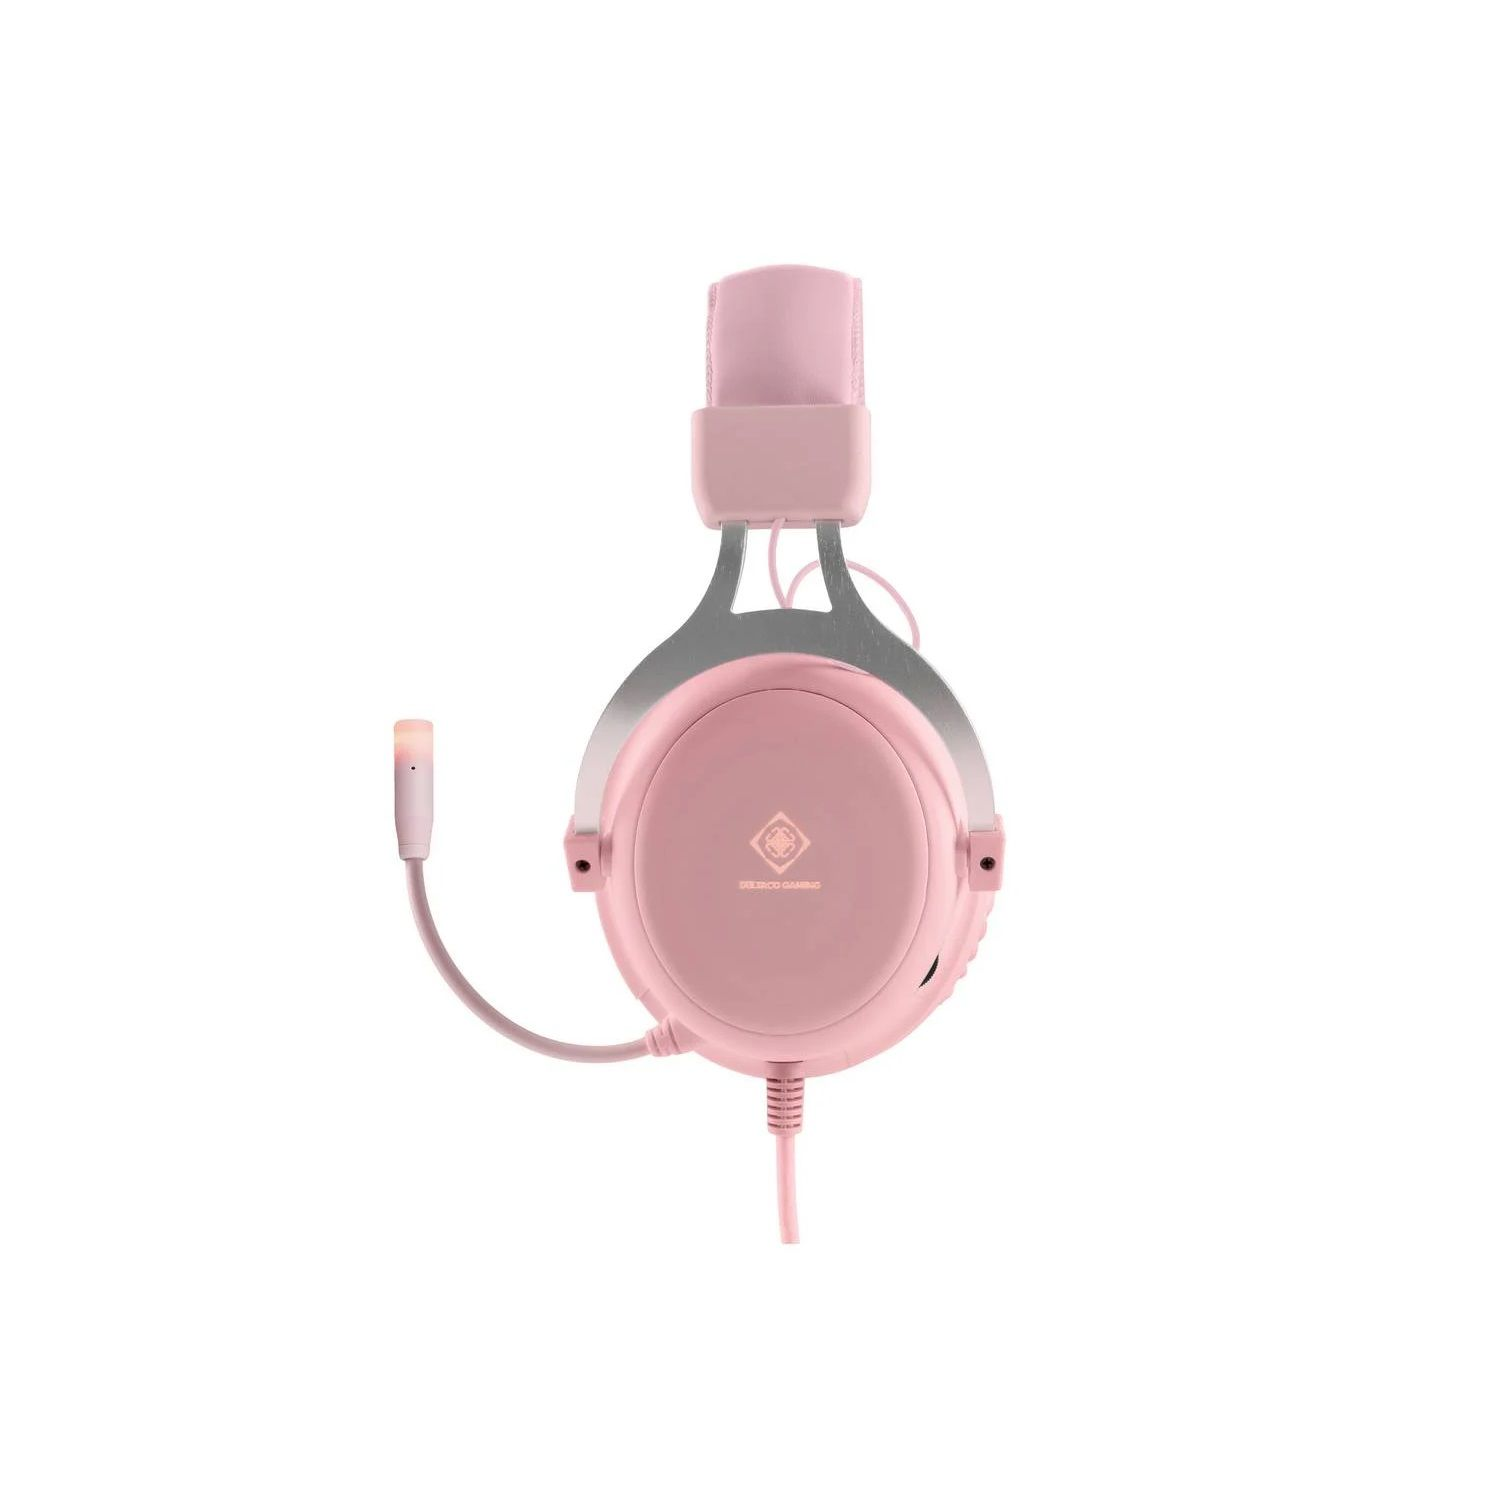 DELTACO GAMING Gamer Headset mit Over-ear Headset LED-Beleuchtung, pink